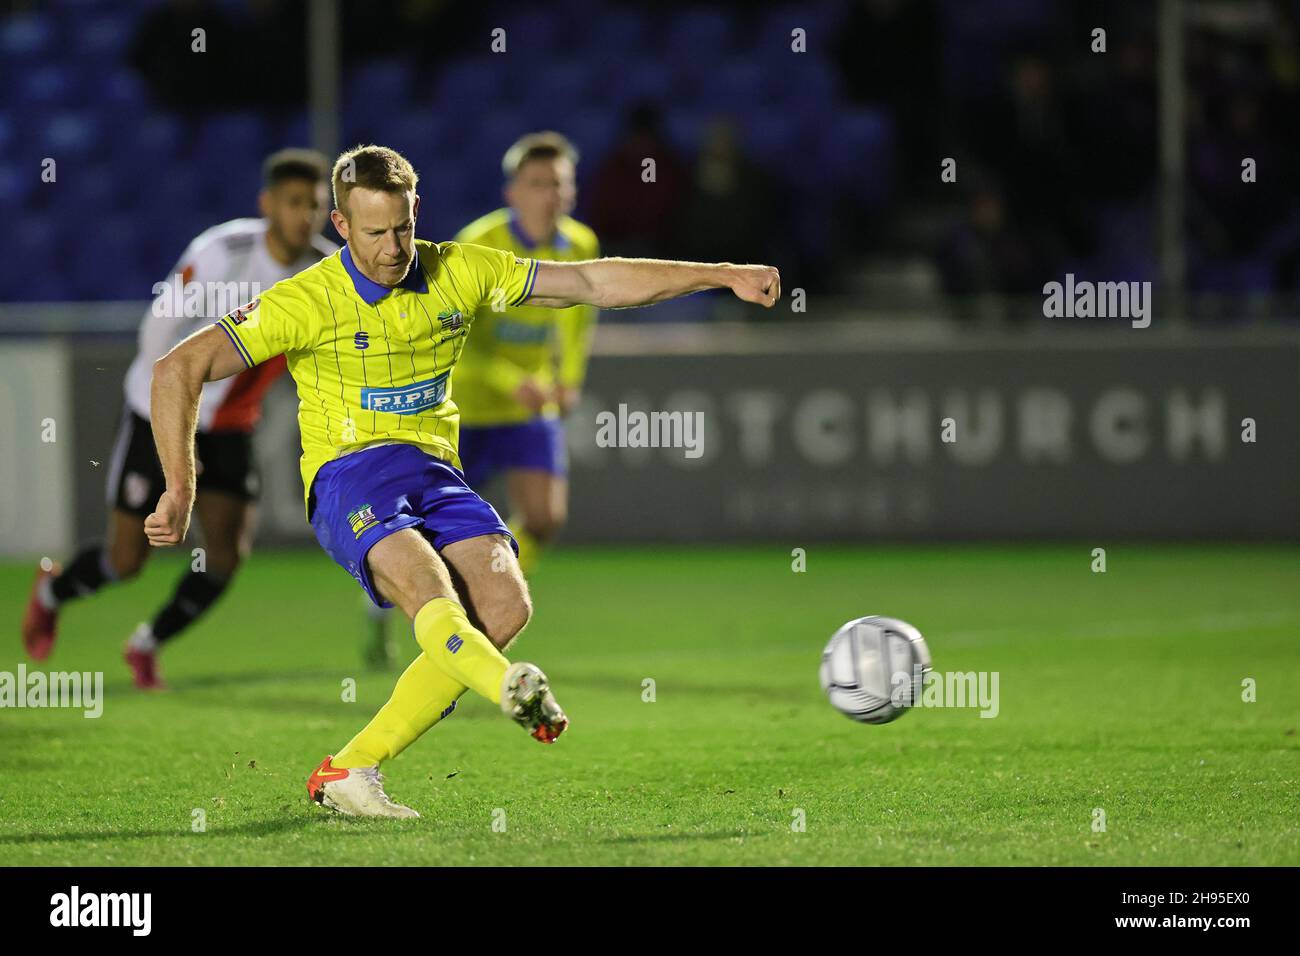 SOLIHULL, ENGLAND. DECEMBER 4TH 2021. Adam Rooney of Solihull Moors scores his sides second goal from the penalty spot during the Vanarama National League match between Solihull Moors and Woking FC at the Armco Stadium, Solihull on Saturday 4th December 2021. (Credit: James Holyoak/Alamy Live News) Stock Photo